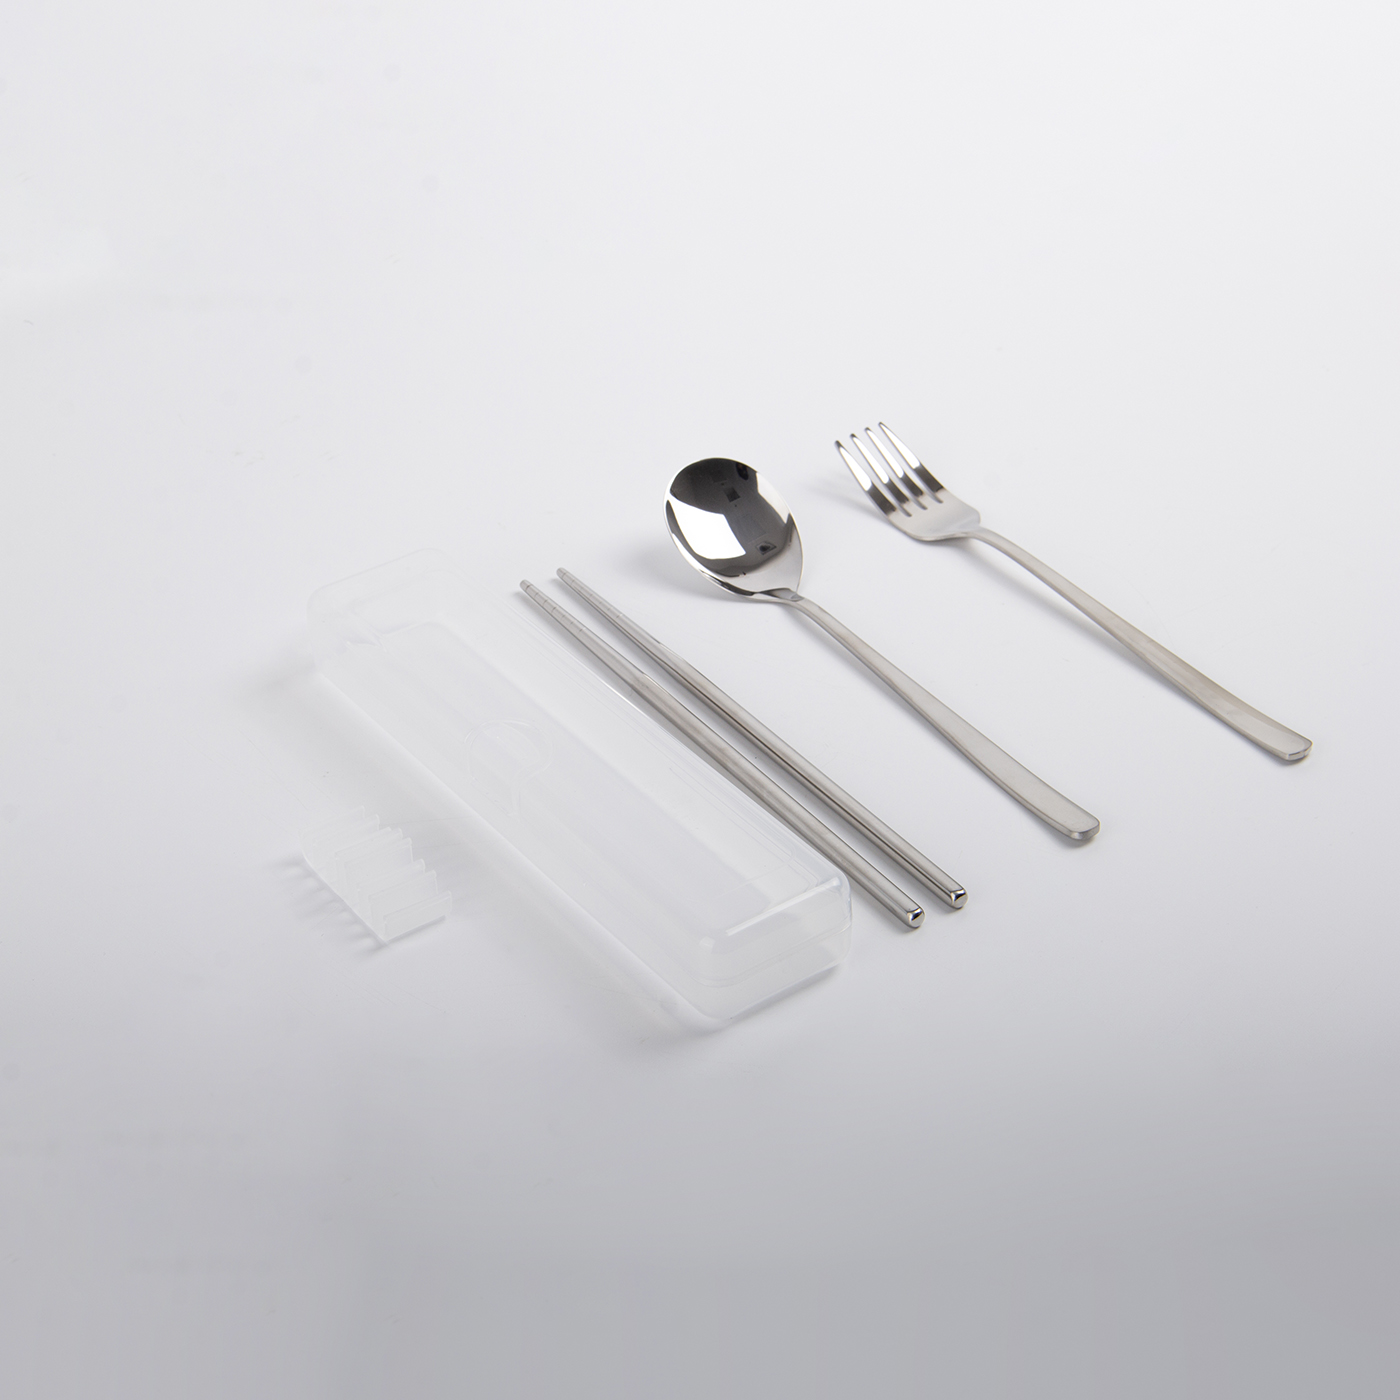 3Pcs Stainless Steel Cutlery With Case2